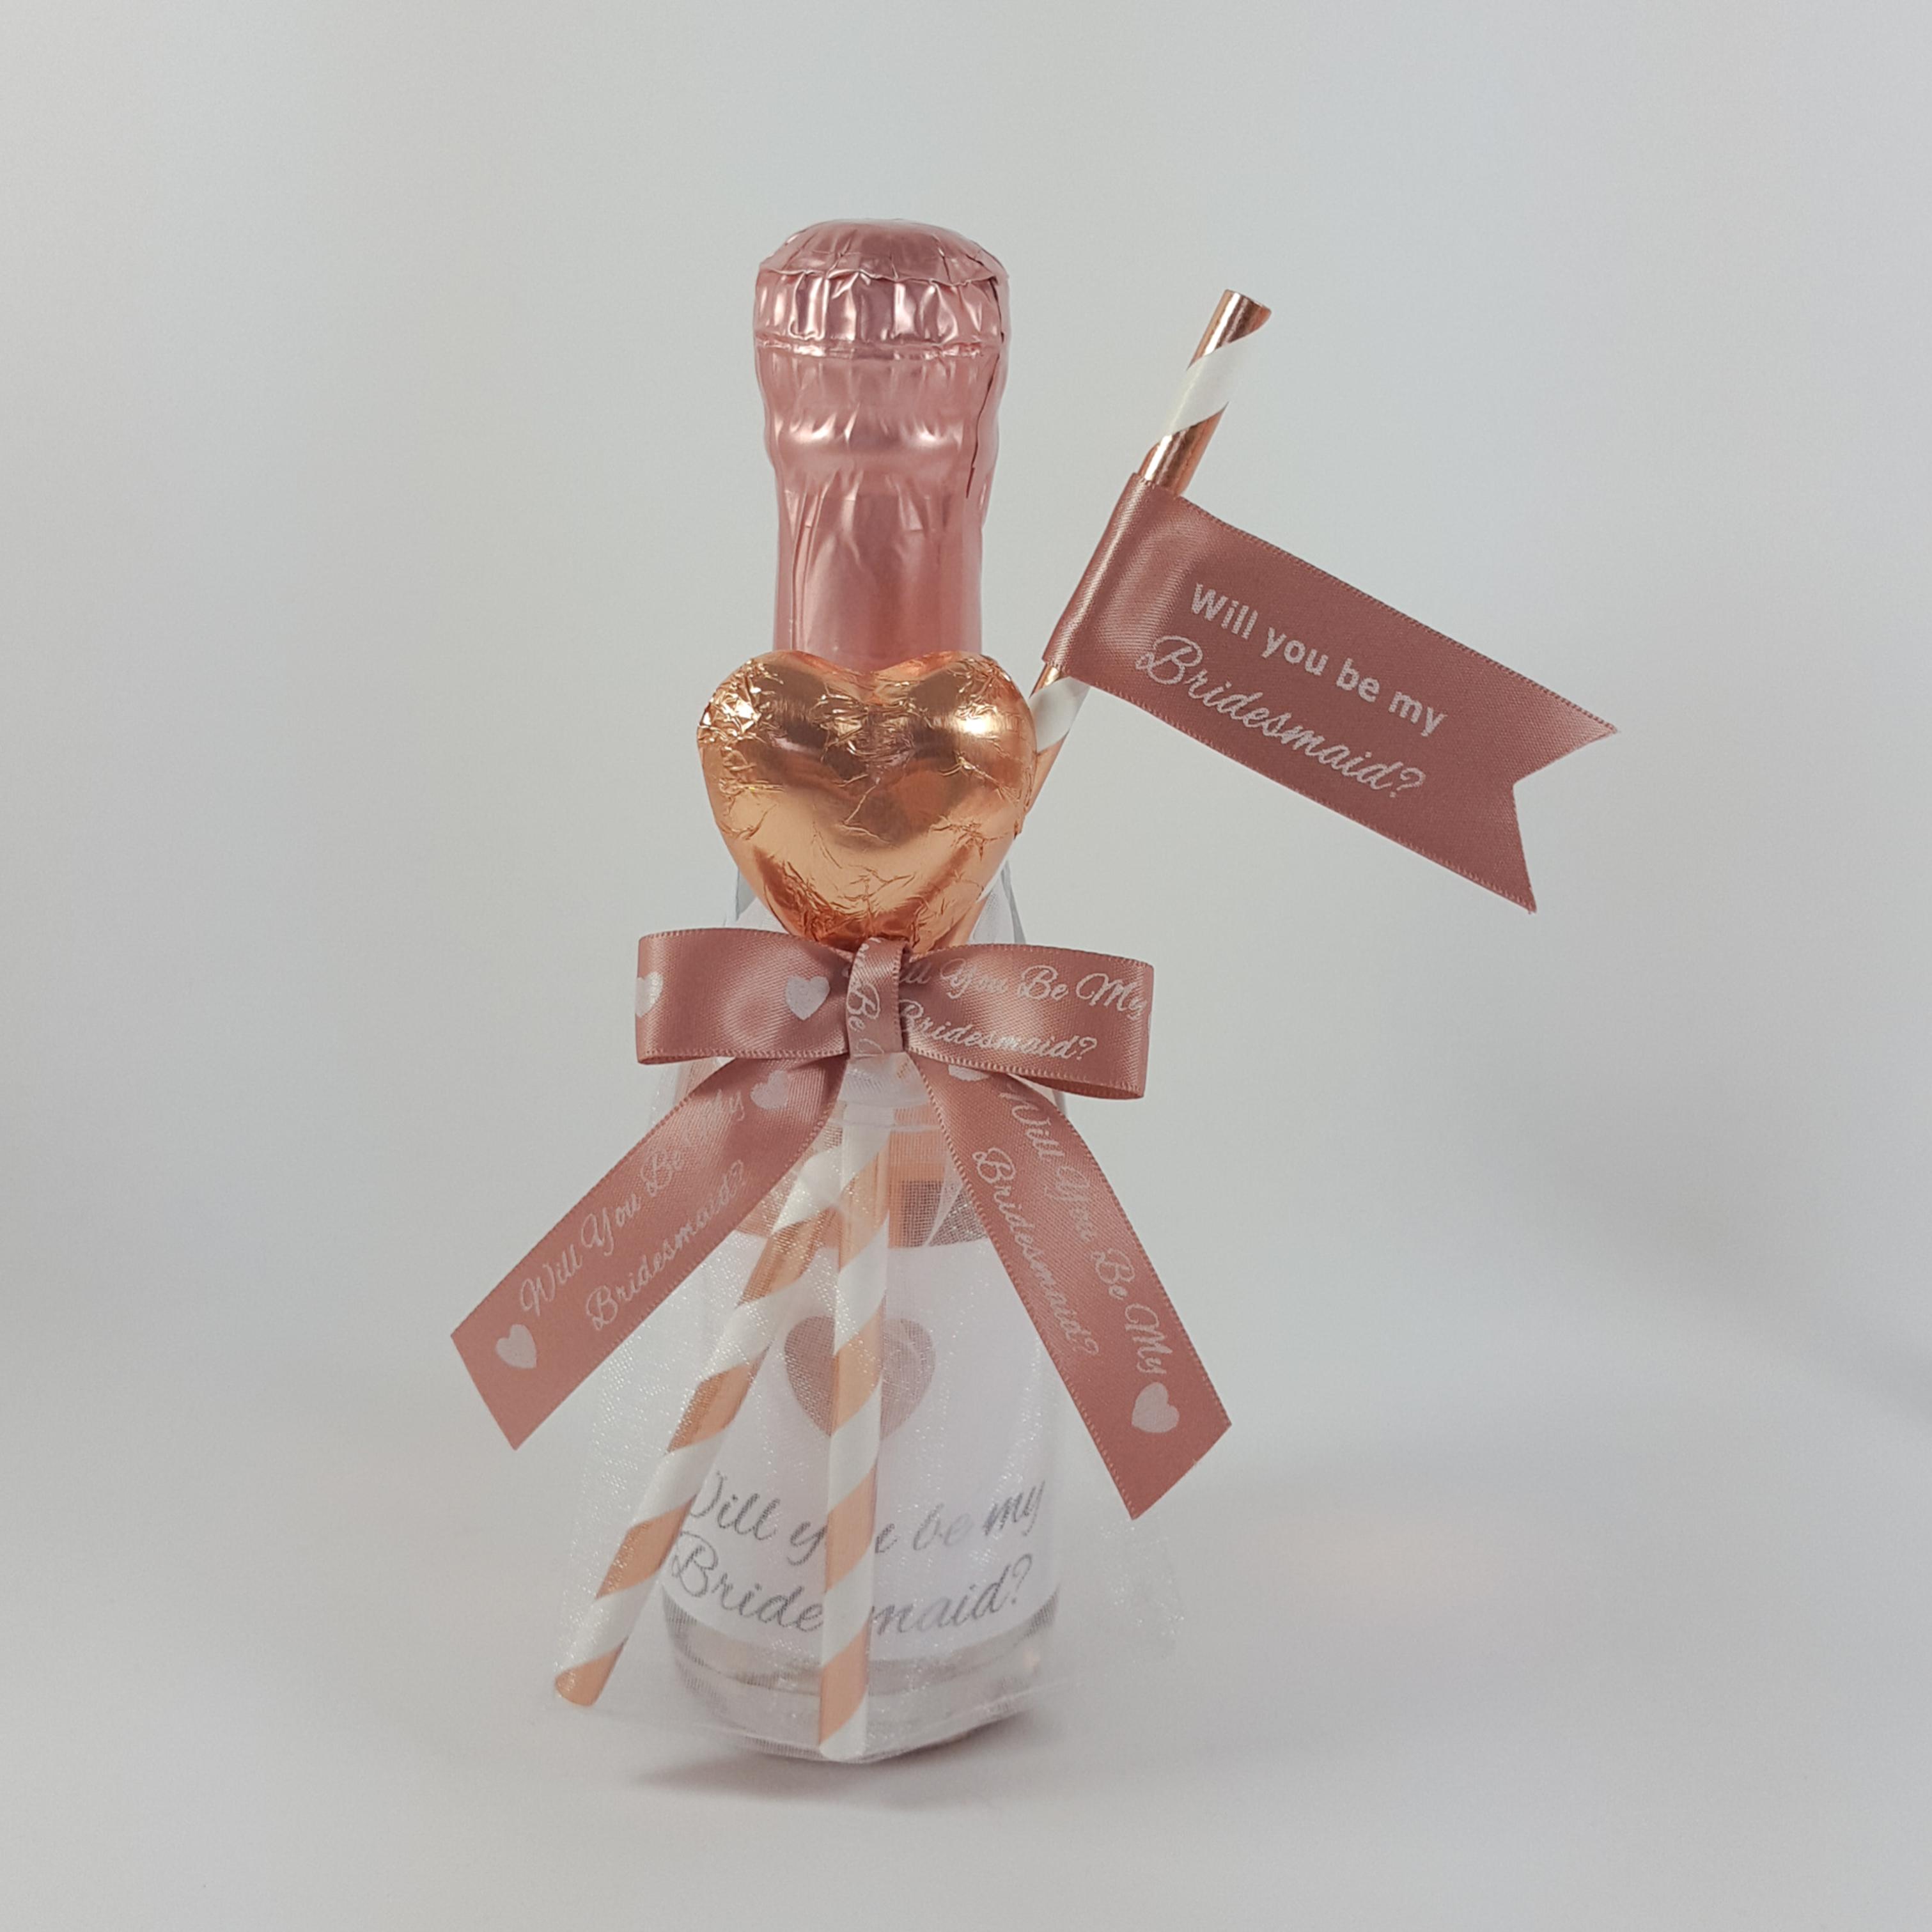 Will you be my bridesmaid rose gold mini wine bottle gift set option